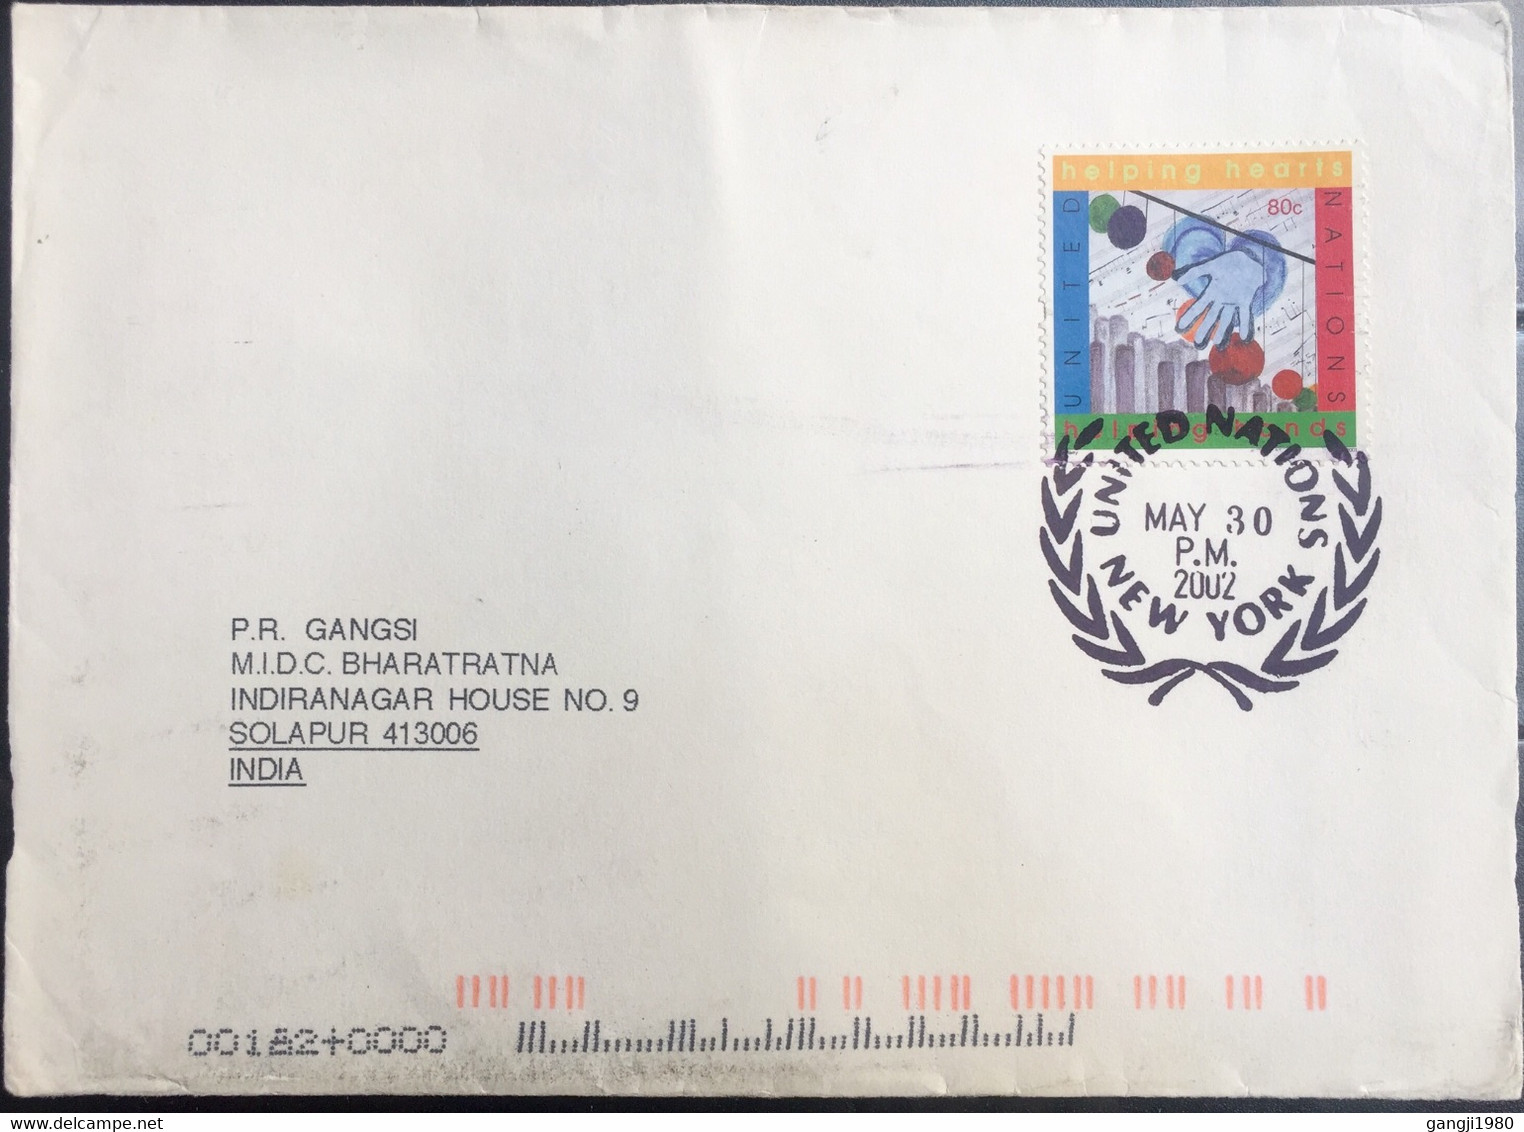 UNITED NATION 2002, USED COVER TO INDIA,HELPING HEART HANDS STAMPS NEW YORK CANCELLATION - Briefe U. Dokumente